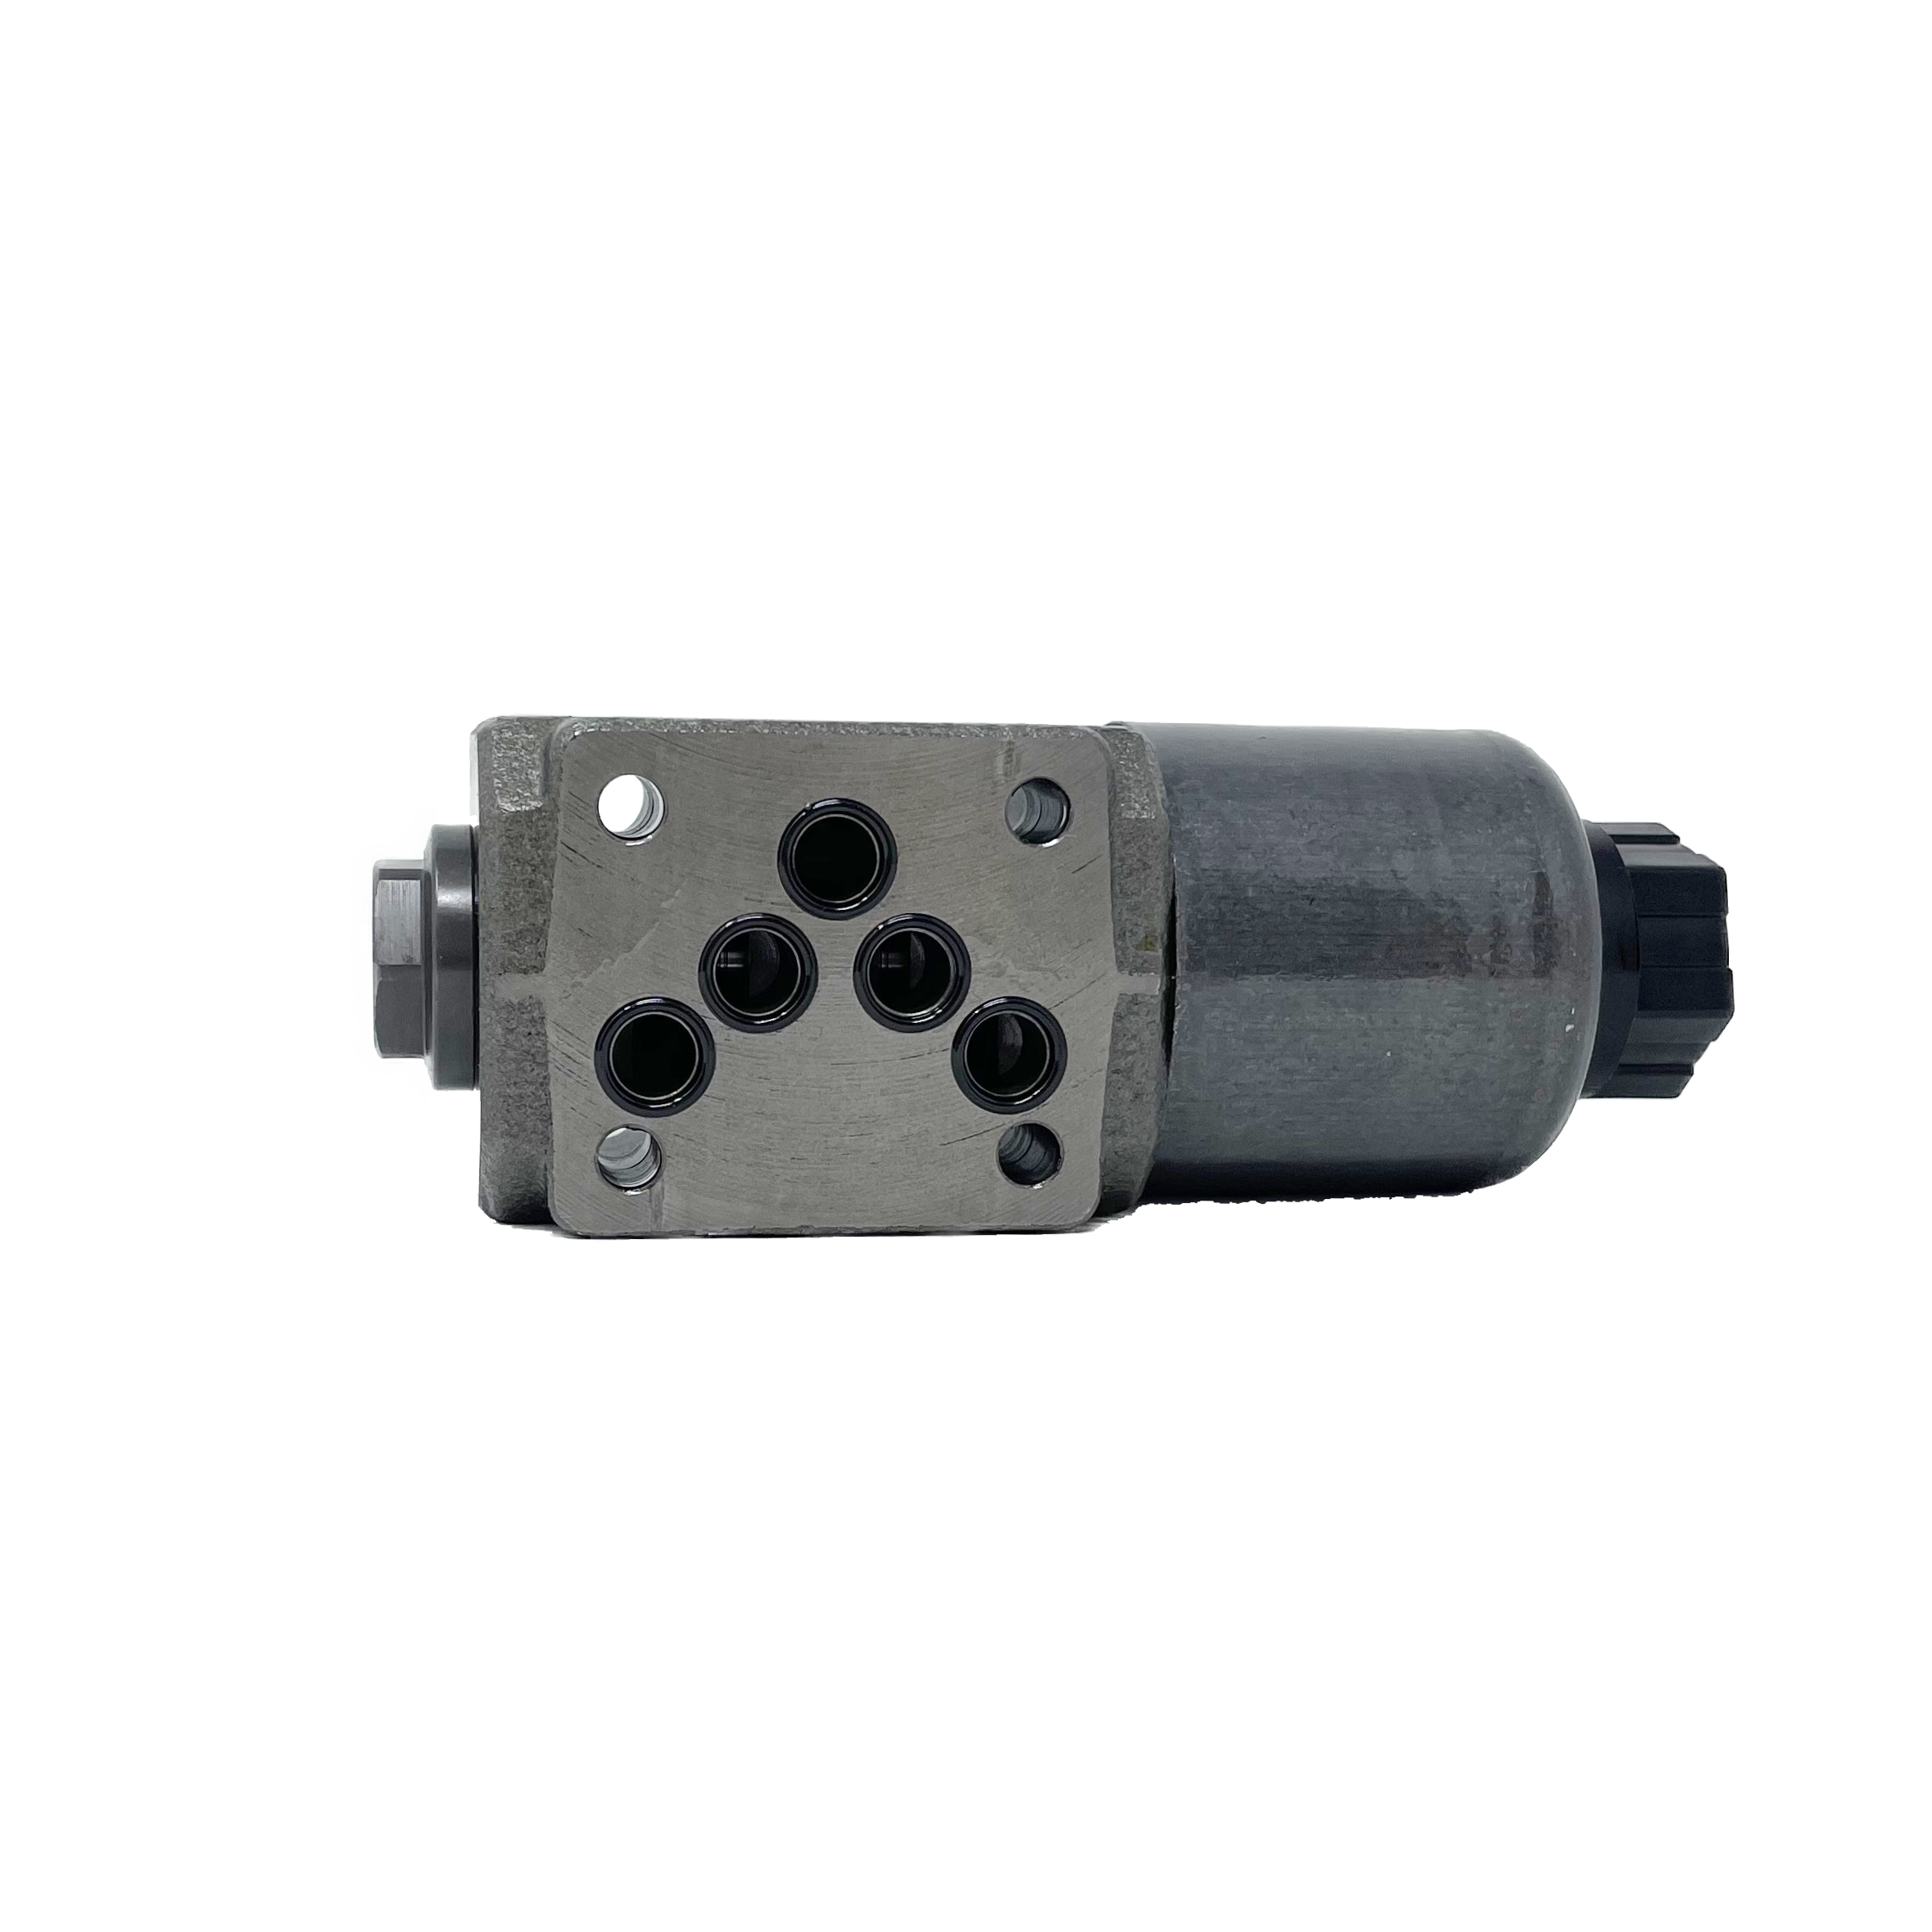 SA-G03-A3X-D2-E21 : Nachi Solenoid Valve, 3P4W, D05 (NG10), 34.3GPM, 5075psi, P to A, B to T in Neutral, 24 VDC, DIN